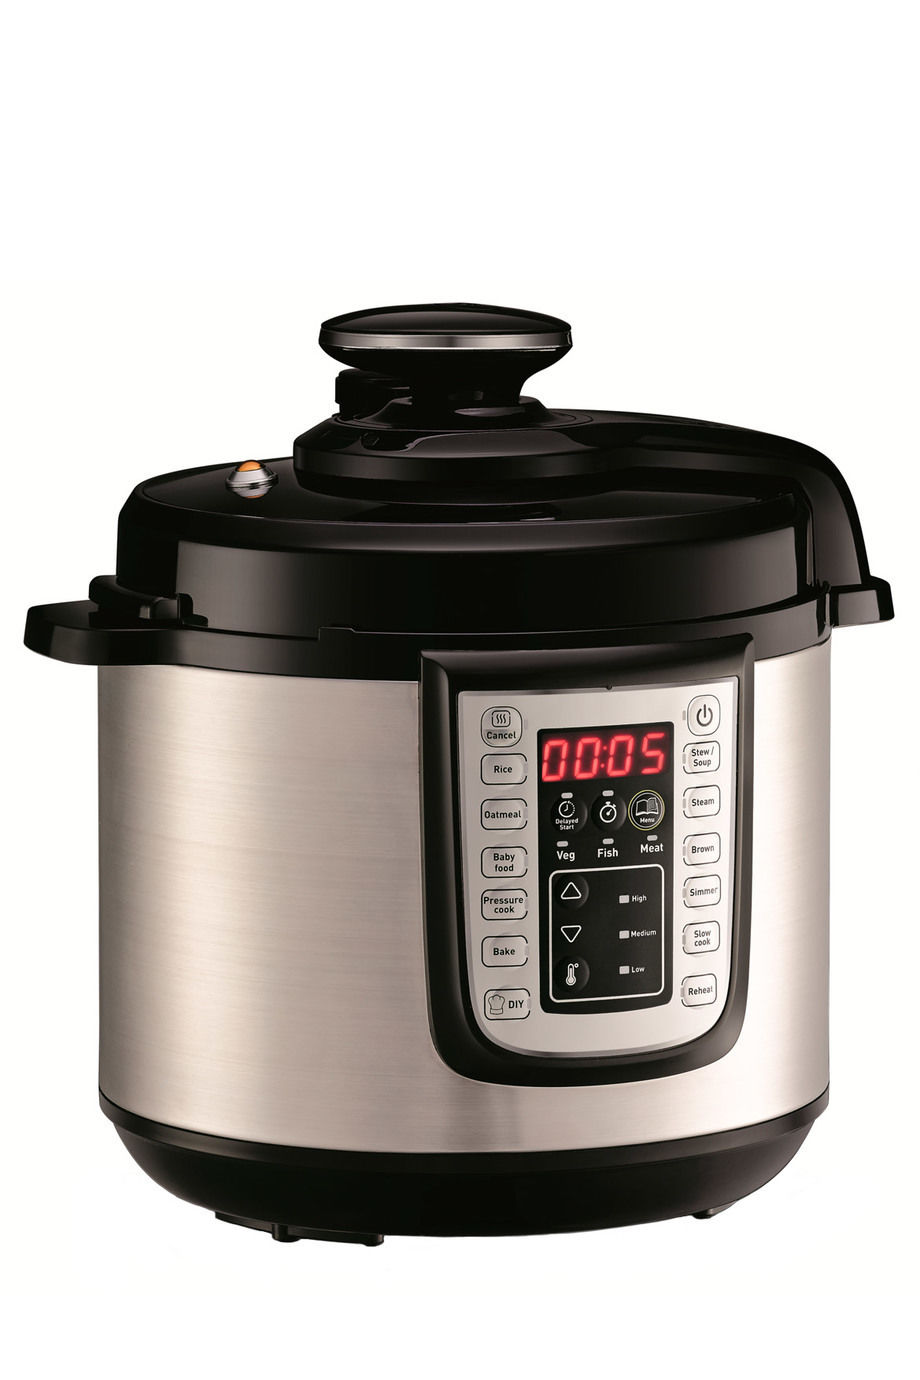 Tefal CY505 Fast & Delicious  6L 智能多功能电压力锅